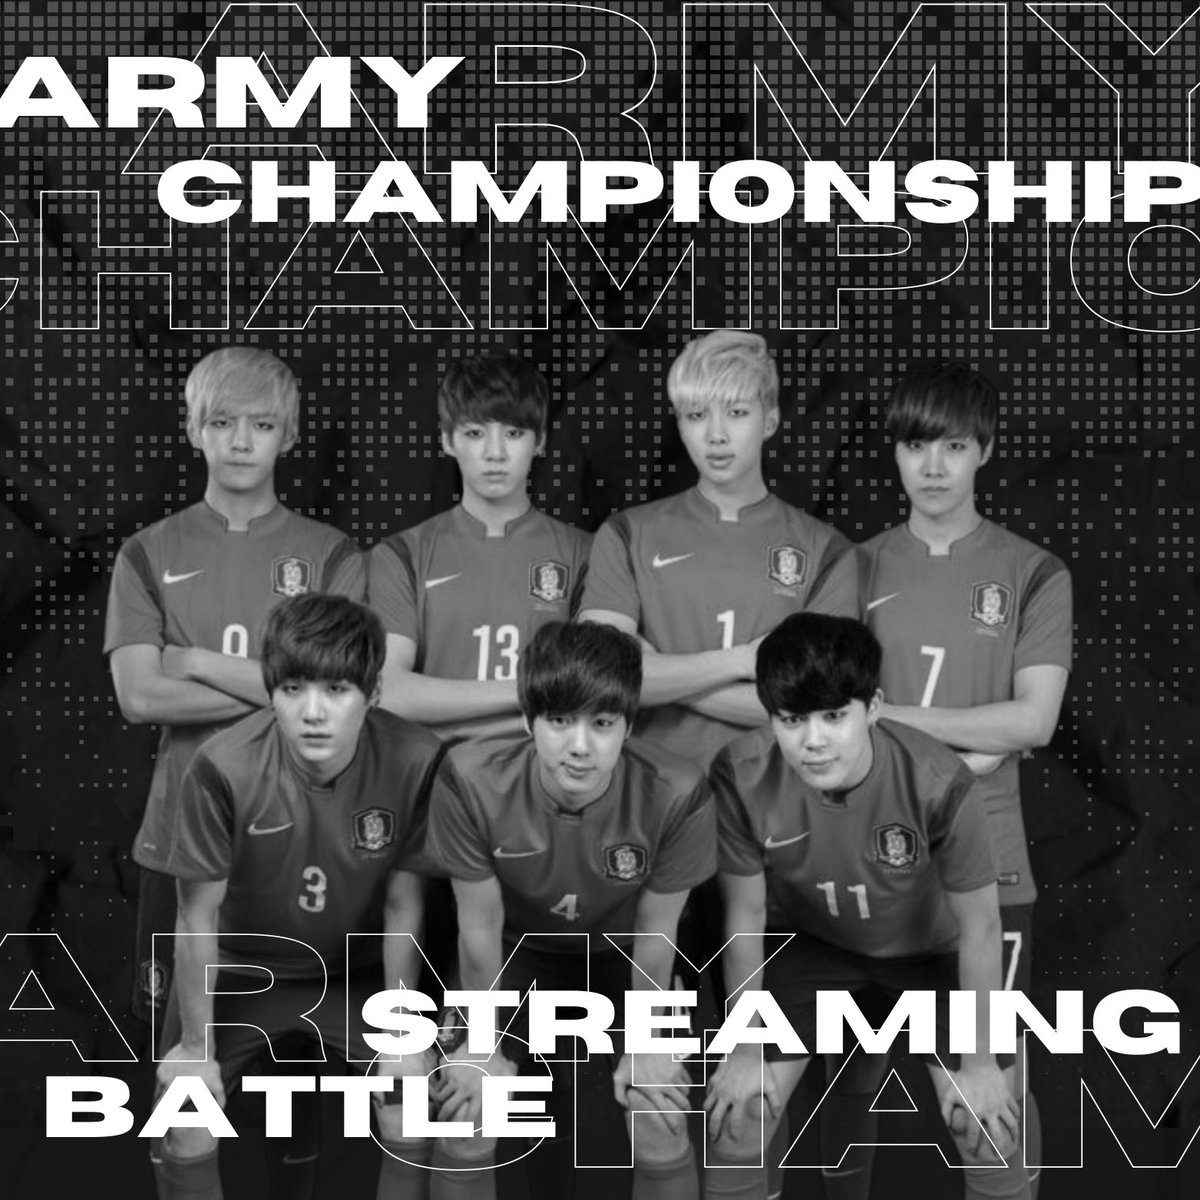 🏆ARMY CHAMPIONSHIP STARTED🏆

💥How To Win?
1. Most Liked playlists
2. Hashtags team is trending
3. team can answer the quiz (point +)

— PLAYLIST NEXT TWEET—

🔑ARMY MATCH DAY
#TeamButter
#GetItLetItRoll

#TeamDynamite
#LightItUpLikeDynamite